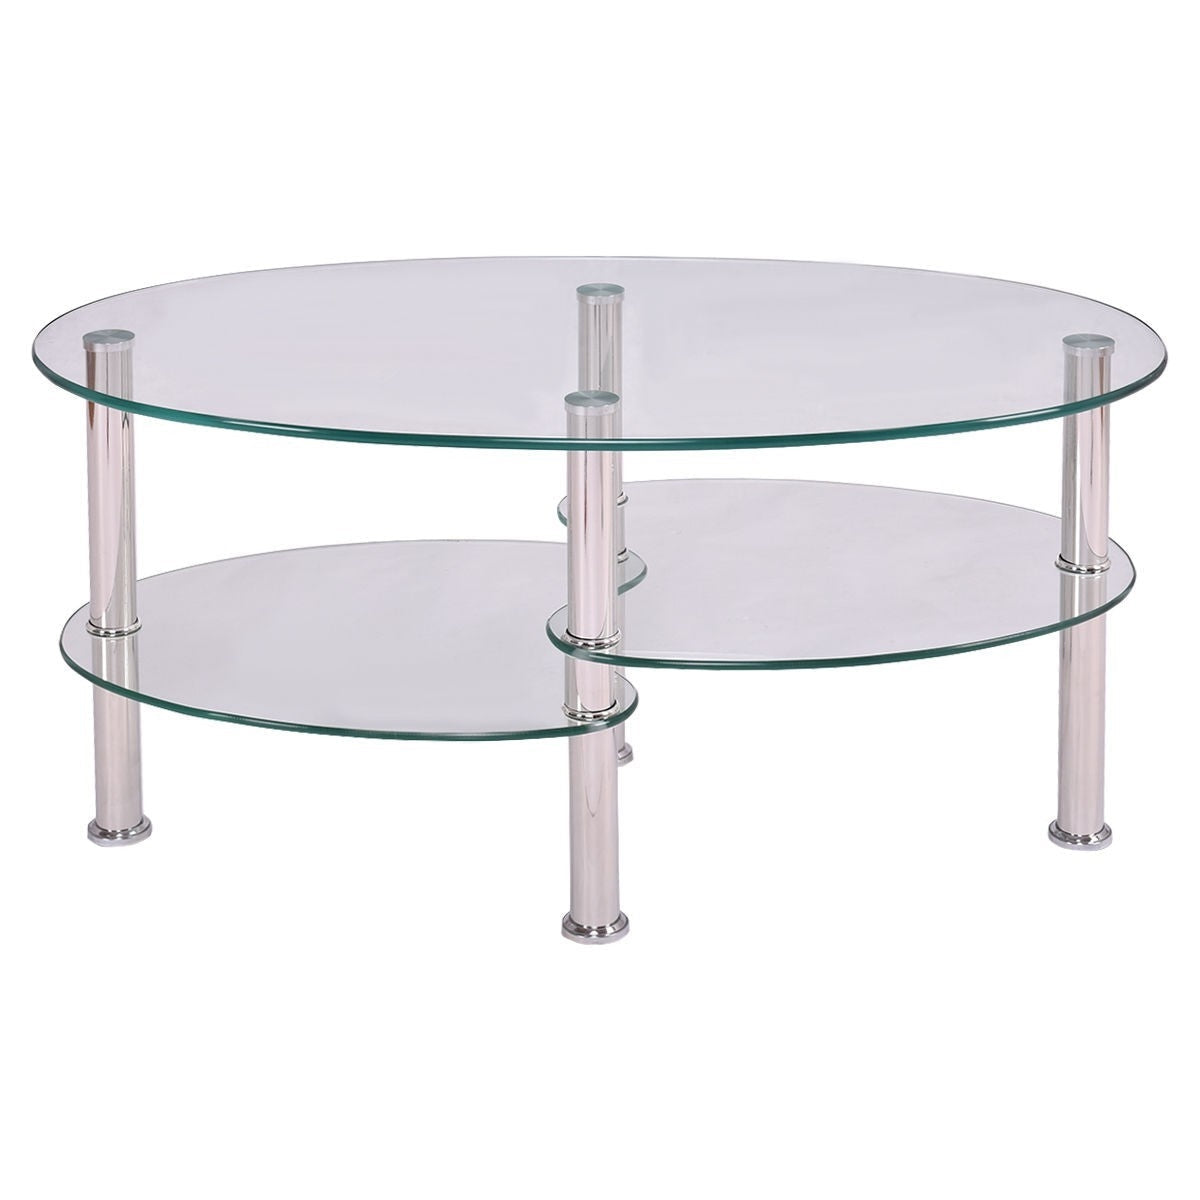 Living Room > Coffee Tables - Modern Oval Tempered Glass Coffee Table With Bottom Shelf